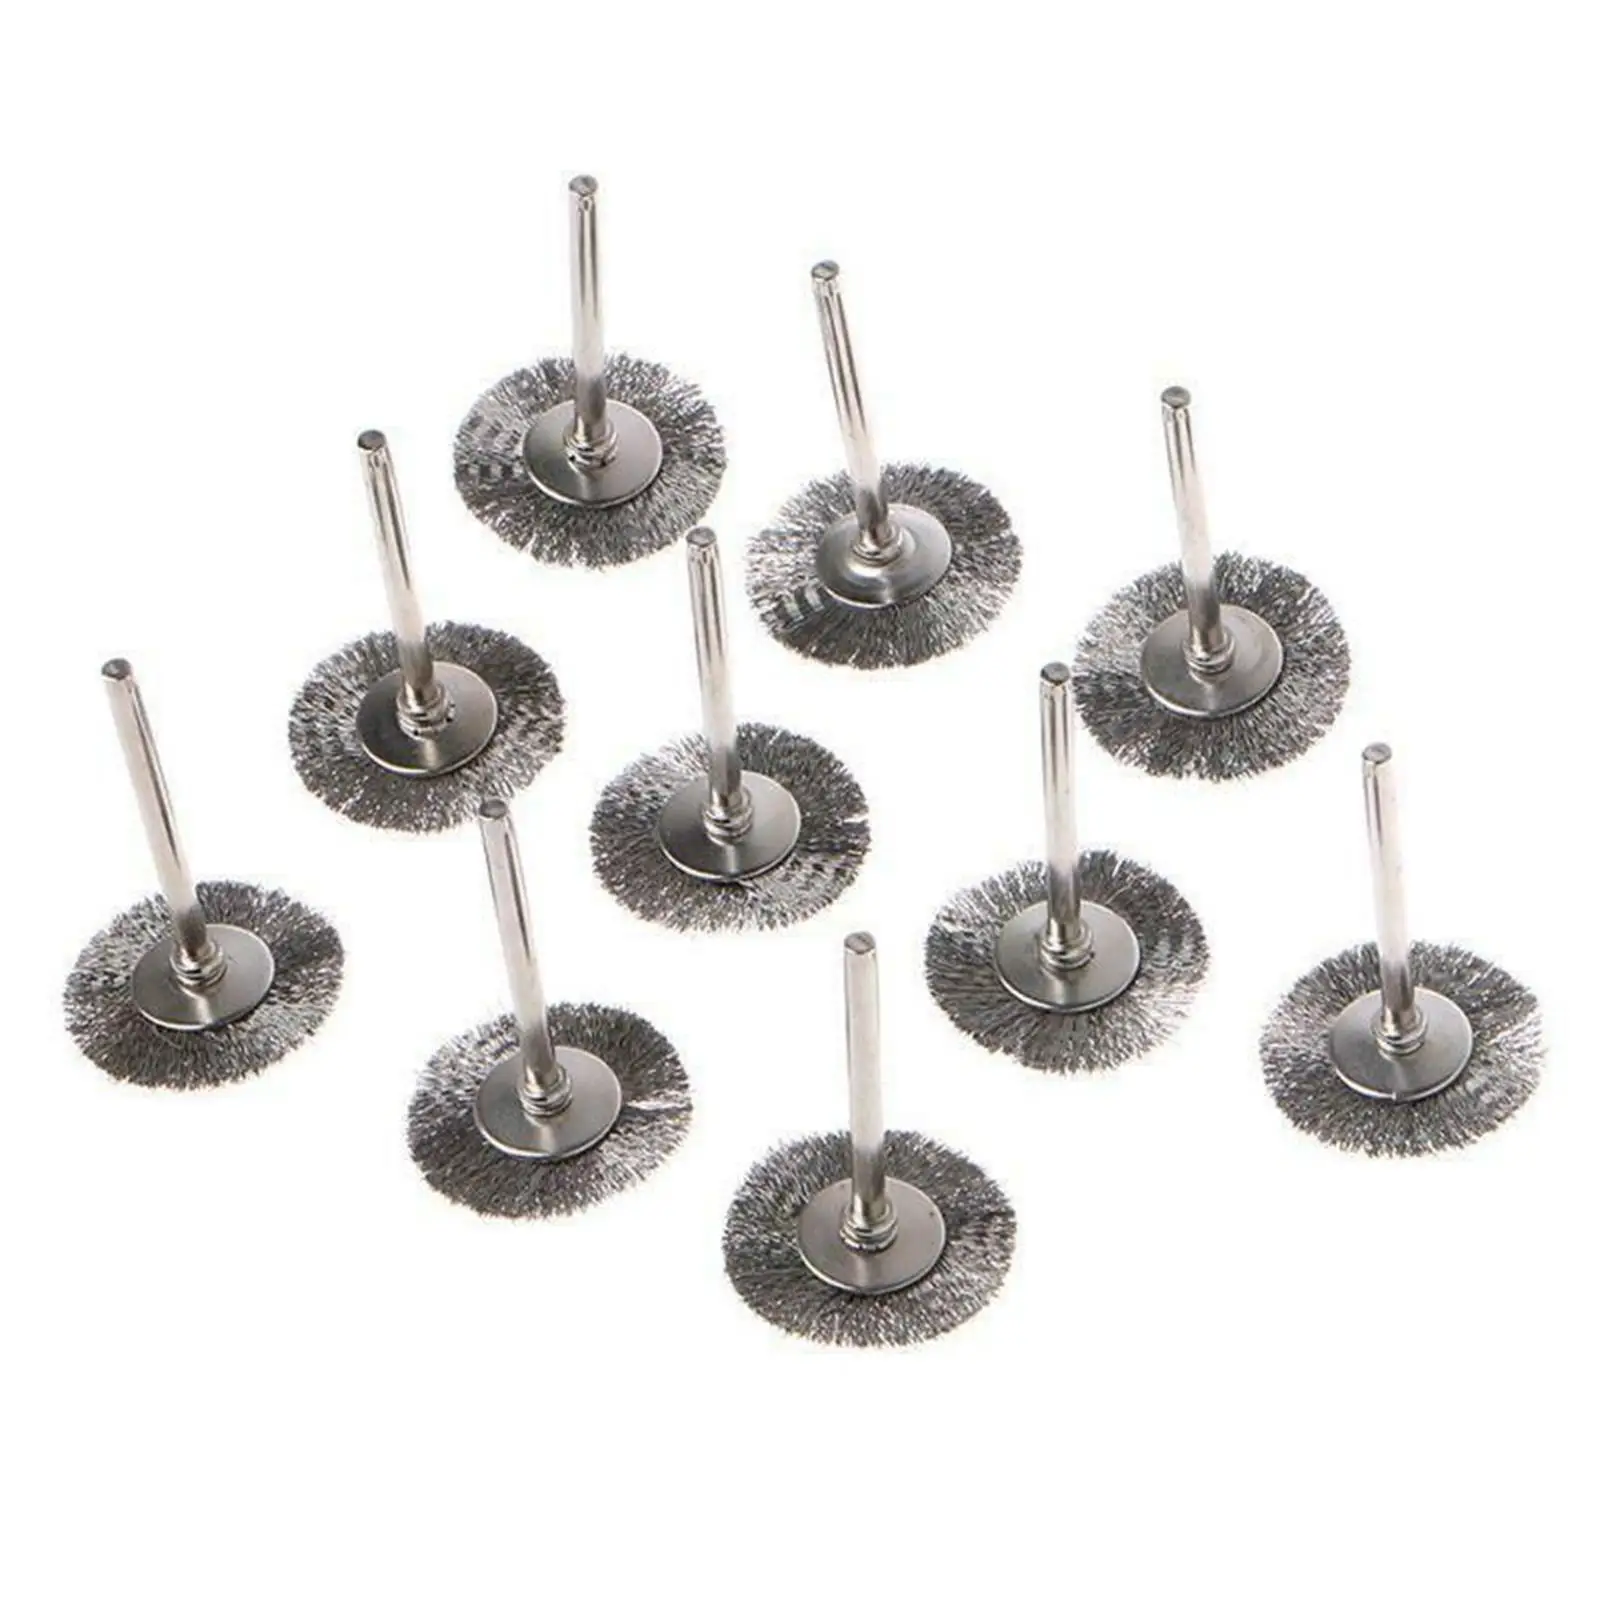 10x 2.2cm Steel wire Brush for Drill Steel Bristle Angle Grinder Surface Polishing Replacement Accessory